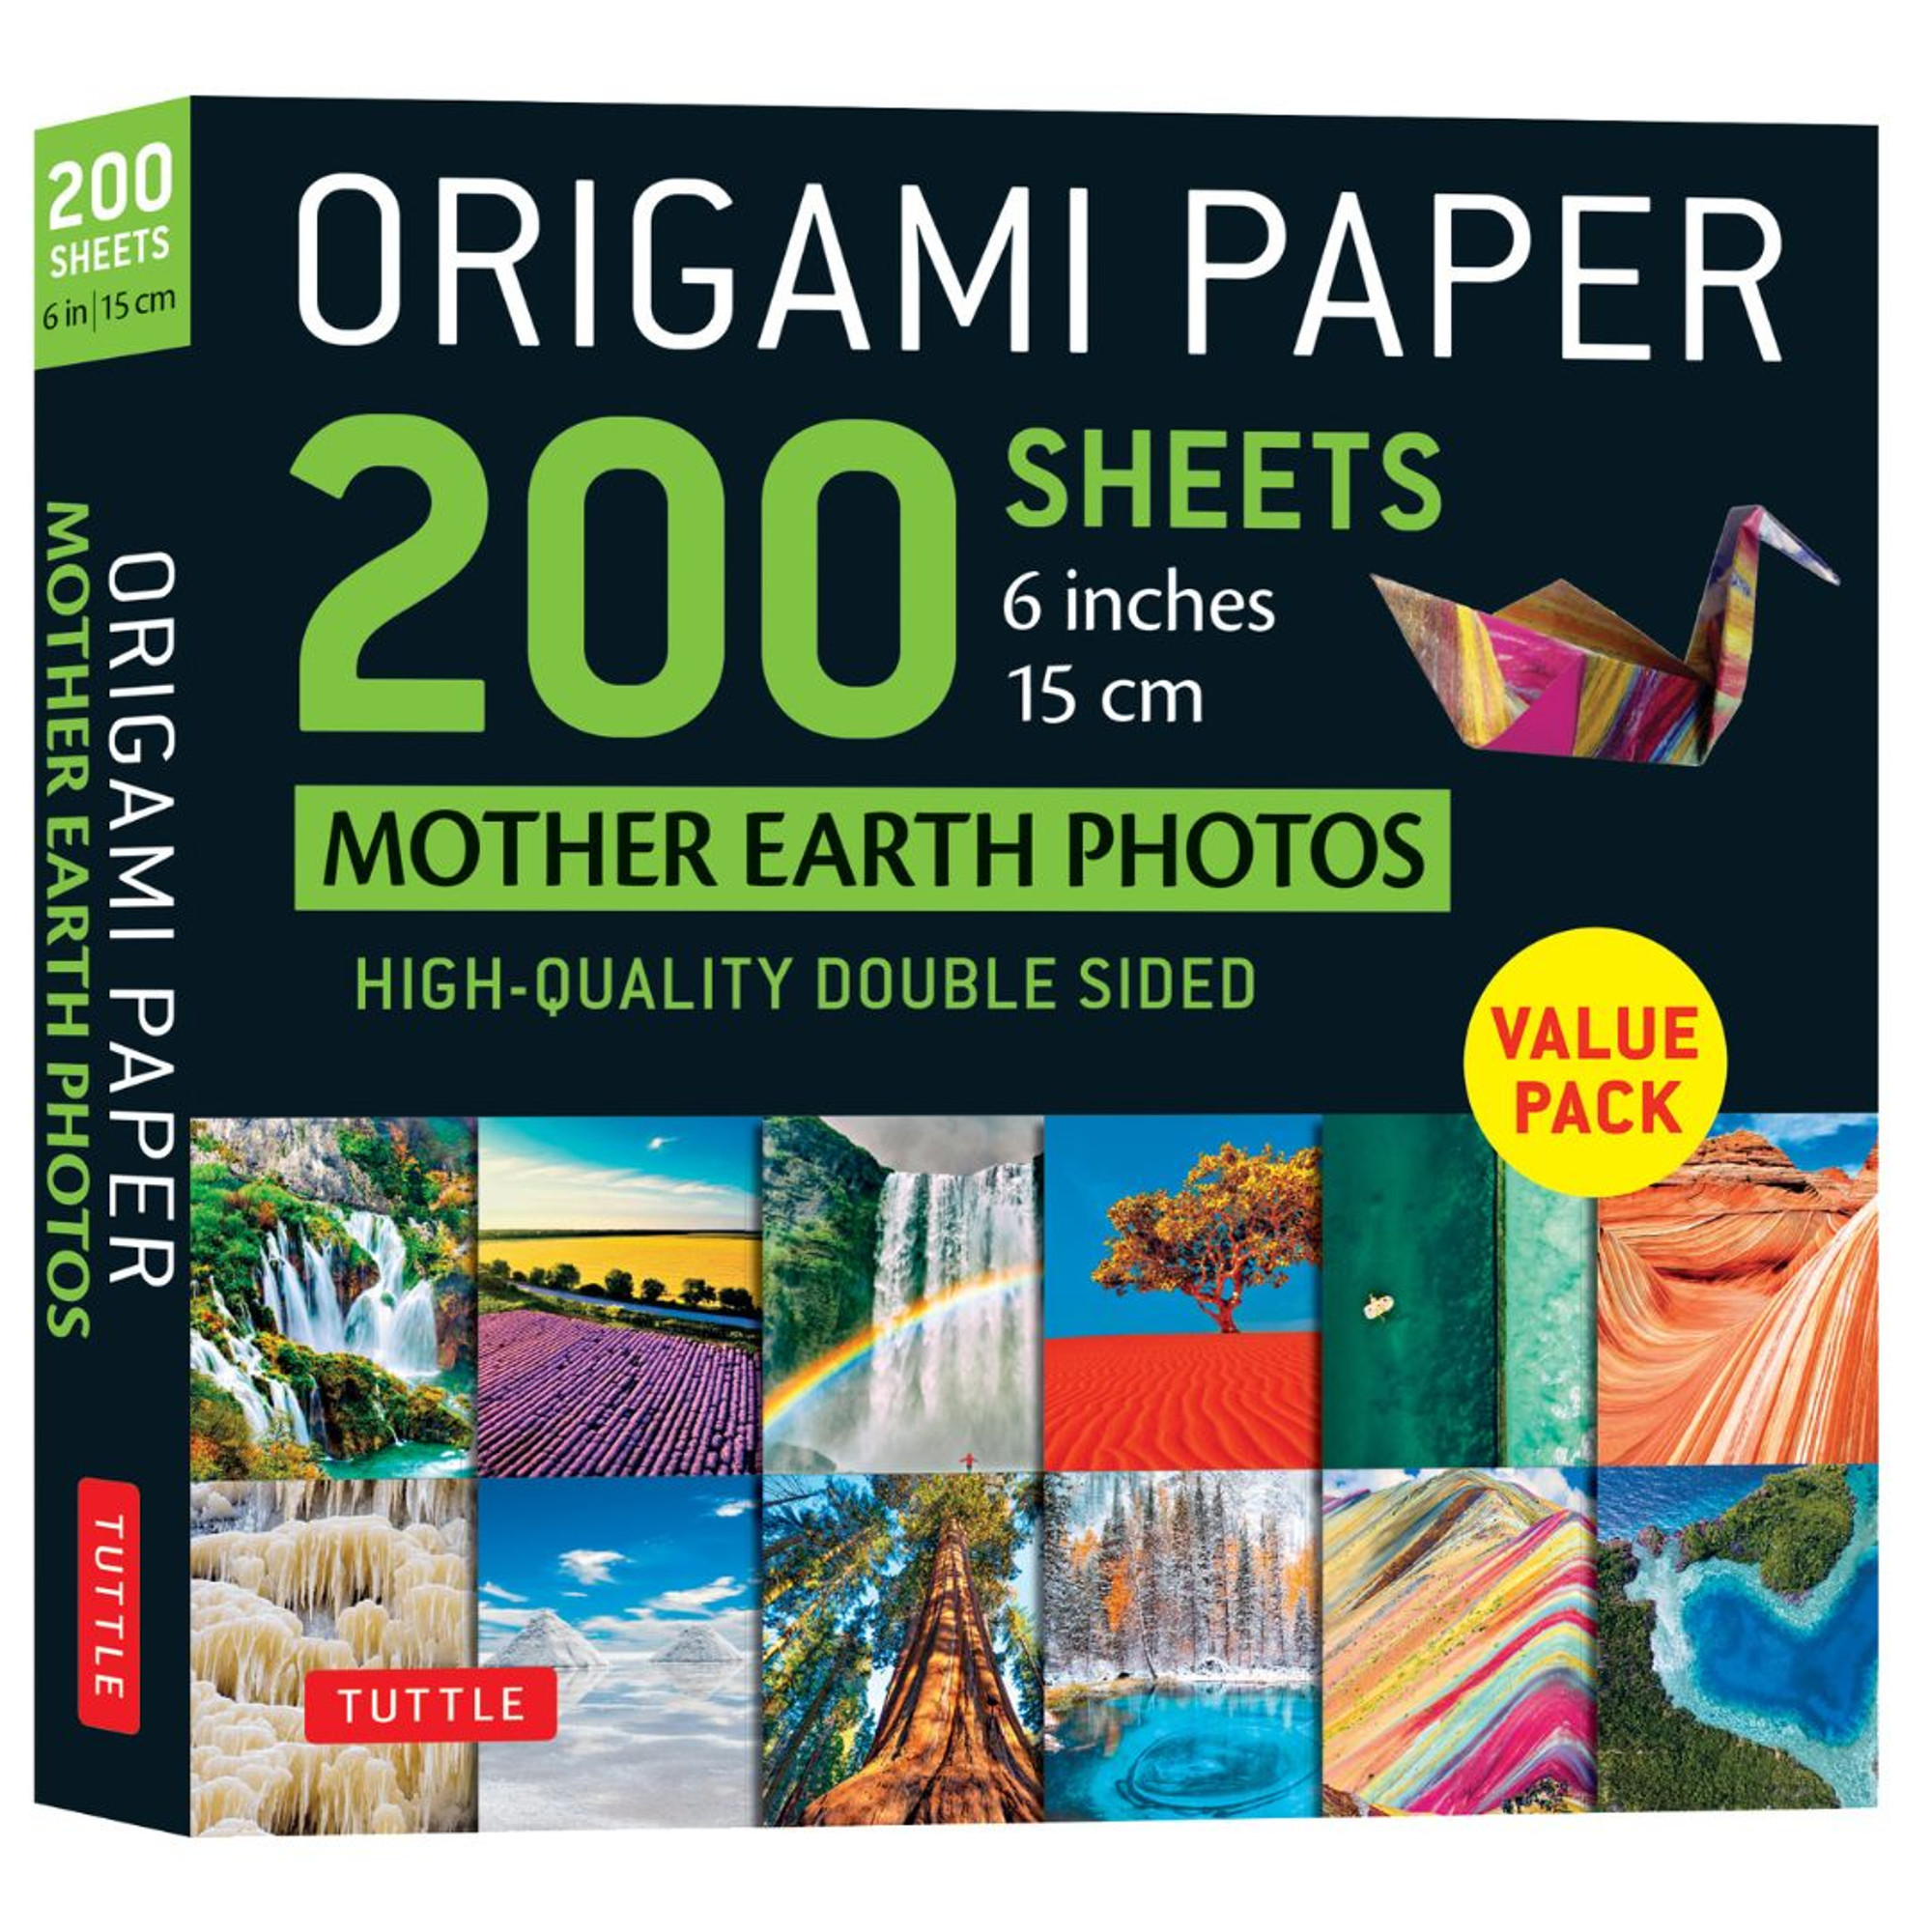 Nature Crafts for Kids and The Amazing Book of Origami HC 2 Books  9780806983738